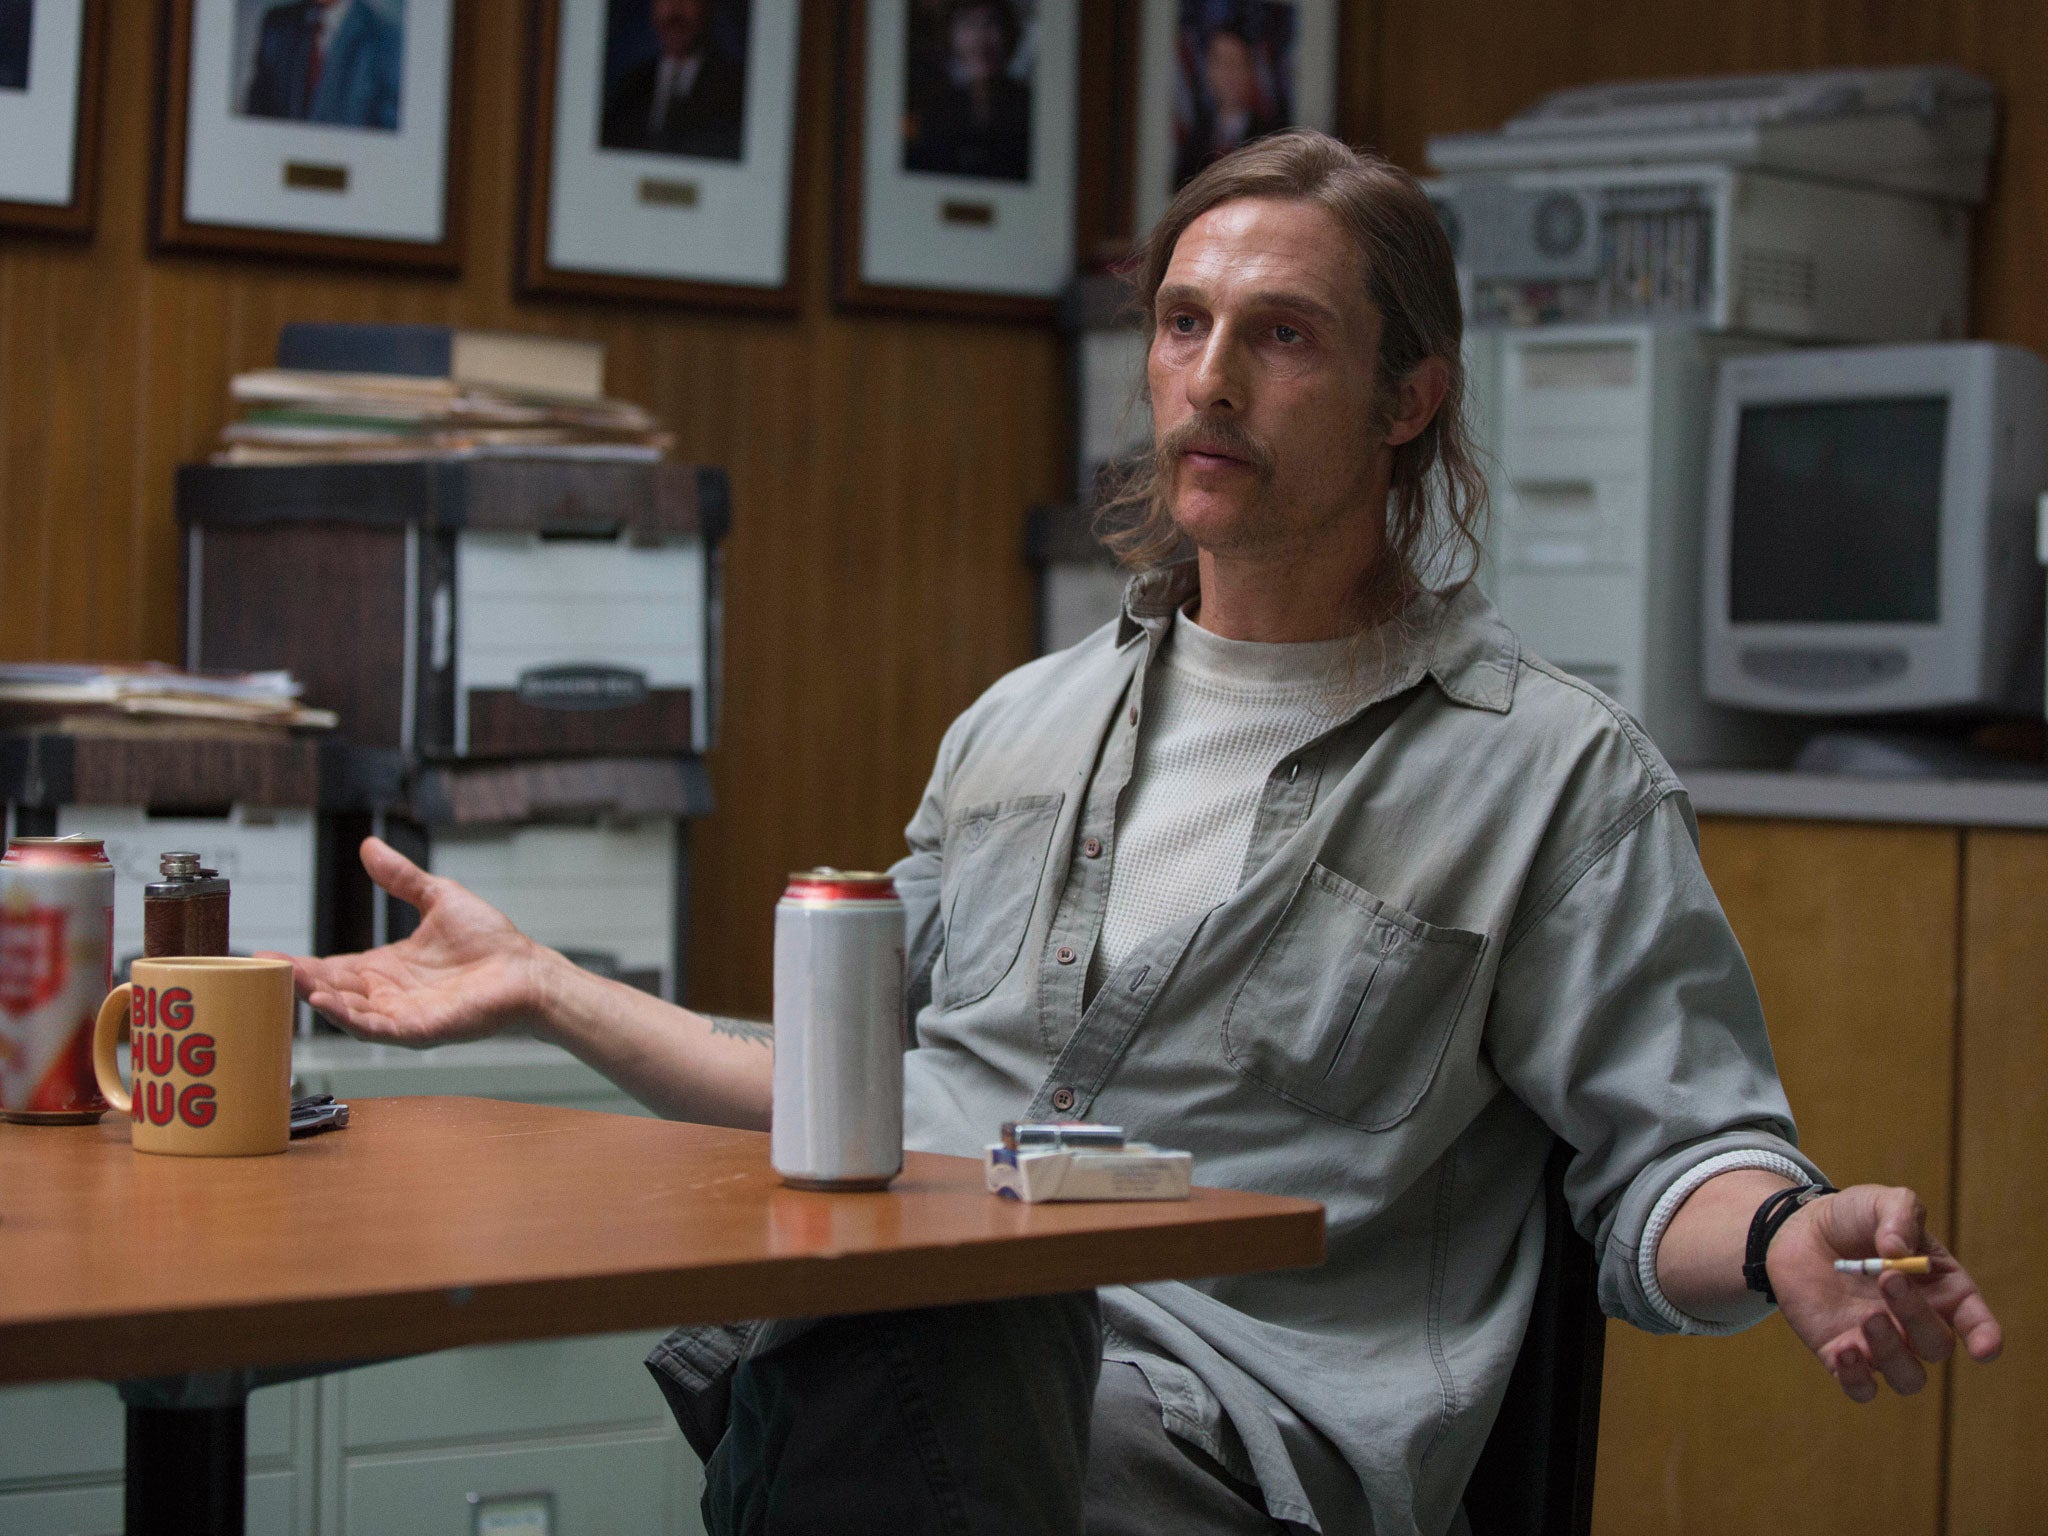 Rust cohle and marty фото 100